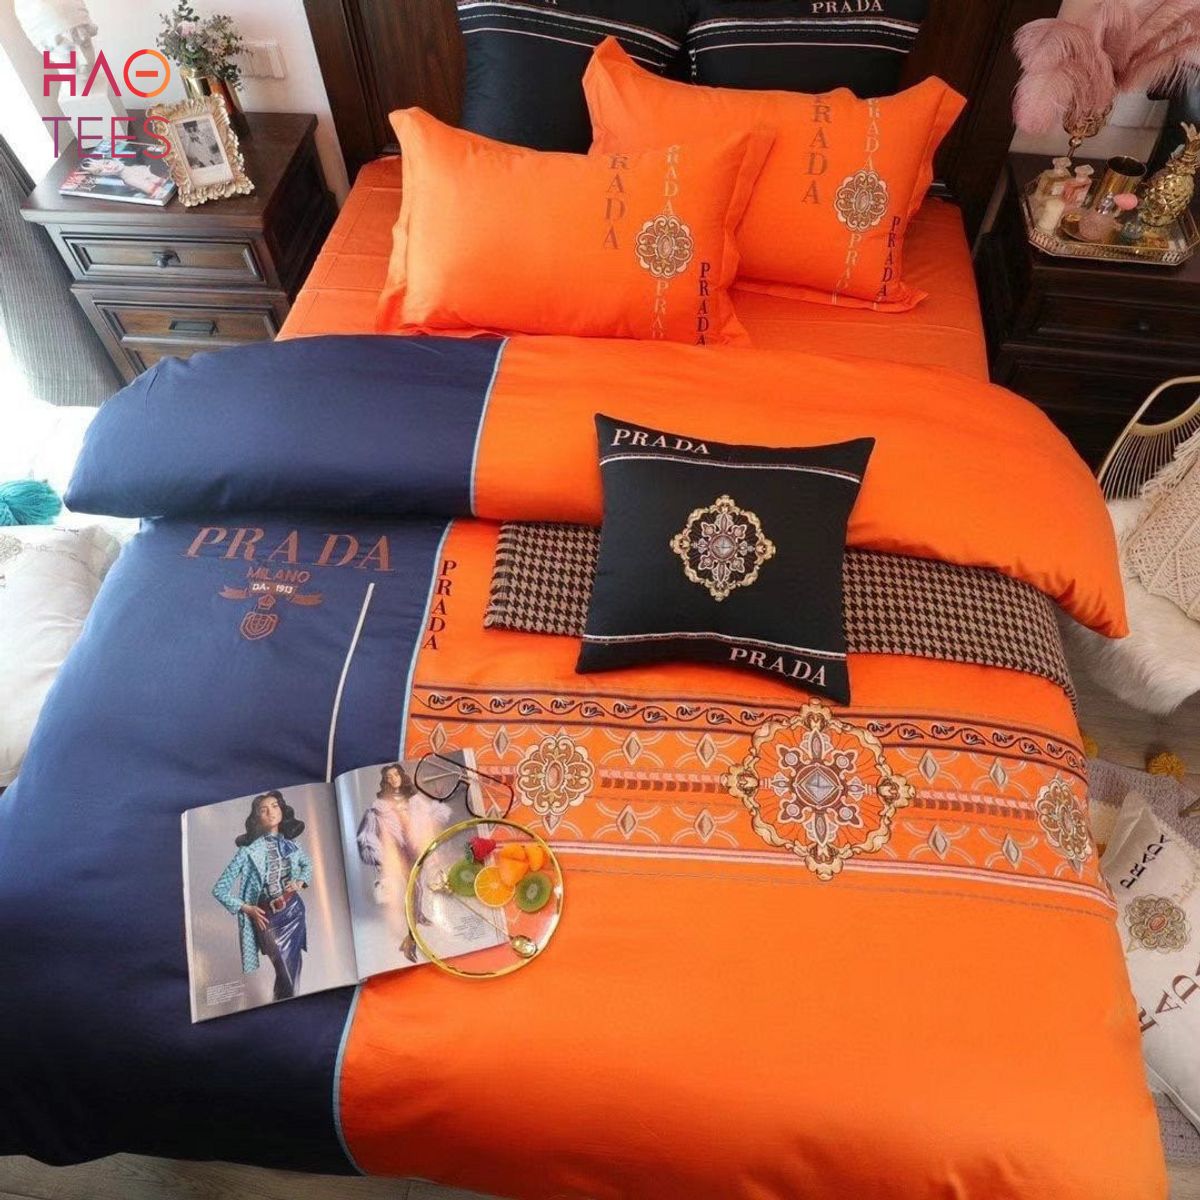 Prada Luxury Brand Inspired 3D Personalized Customized Bedding Sets